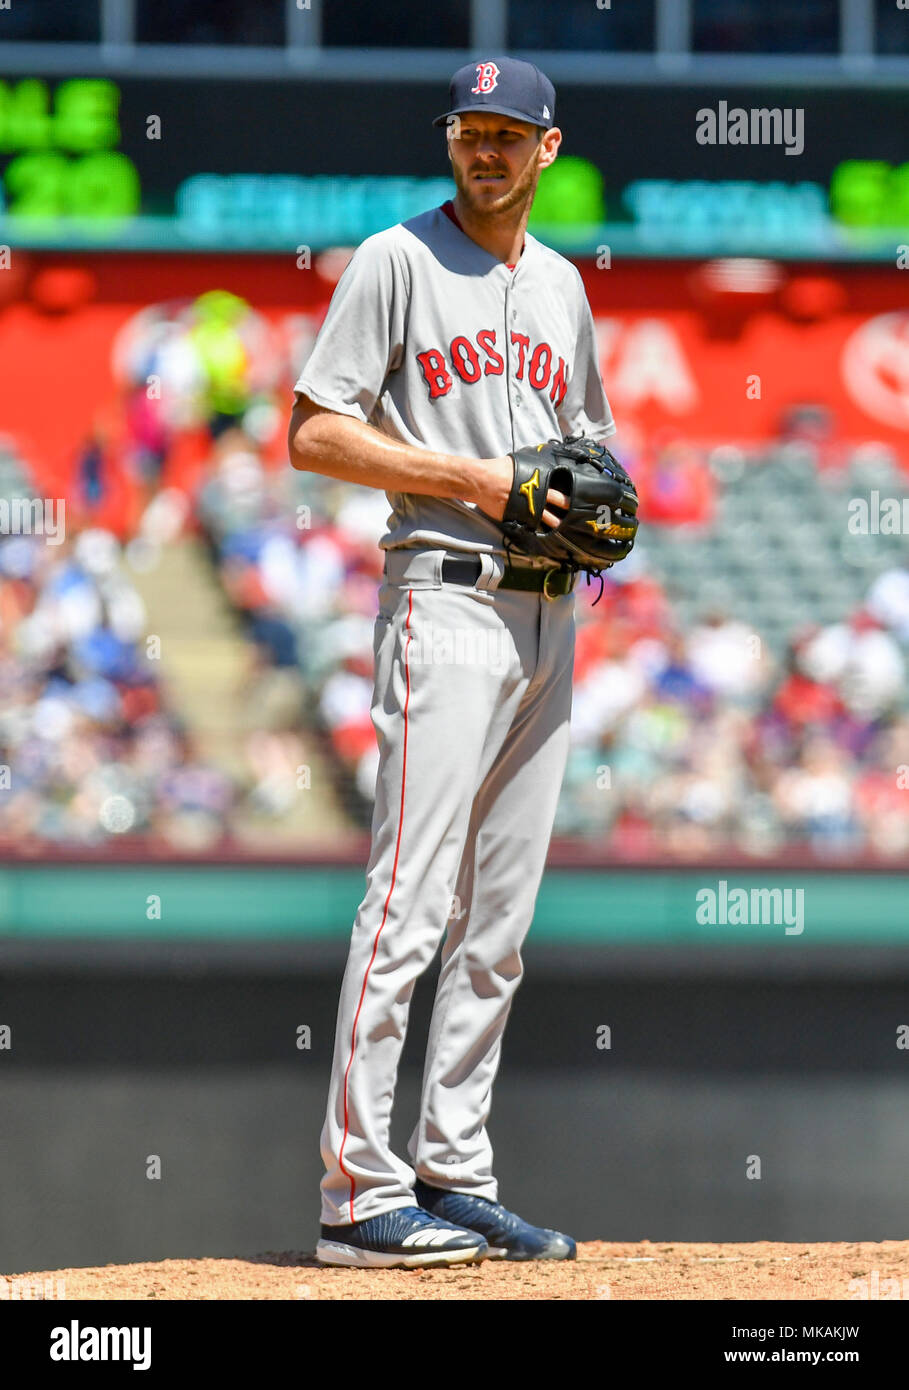 May 06, 2018: Boston Red Sox starting pitcher Chris Sale #41 pitched 7  inning and struck out 12 batters during an MLB game between the Boston Red  Sox and the Texas Rangers